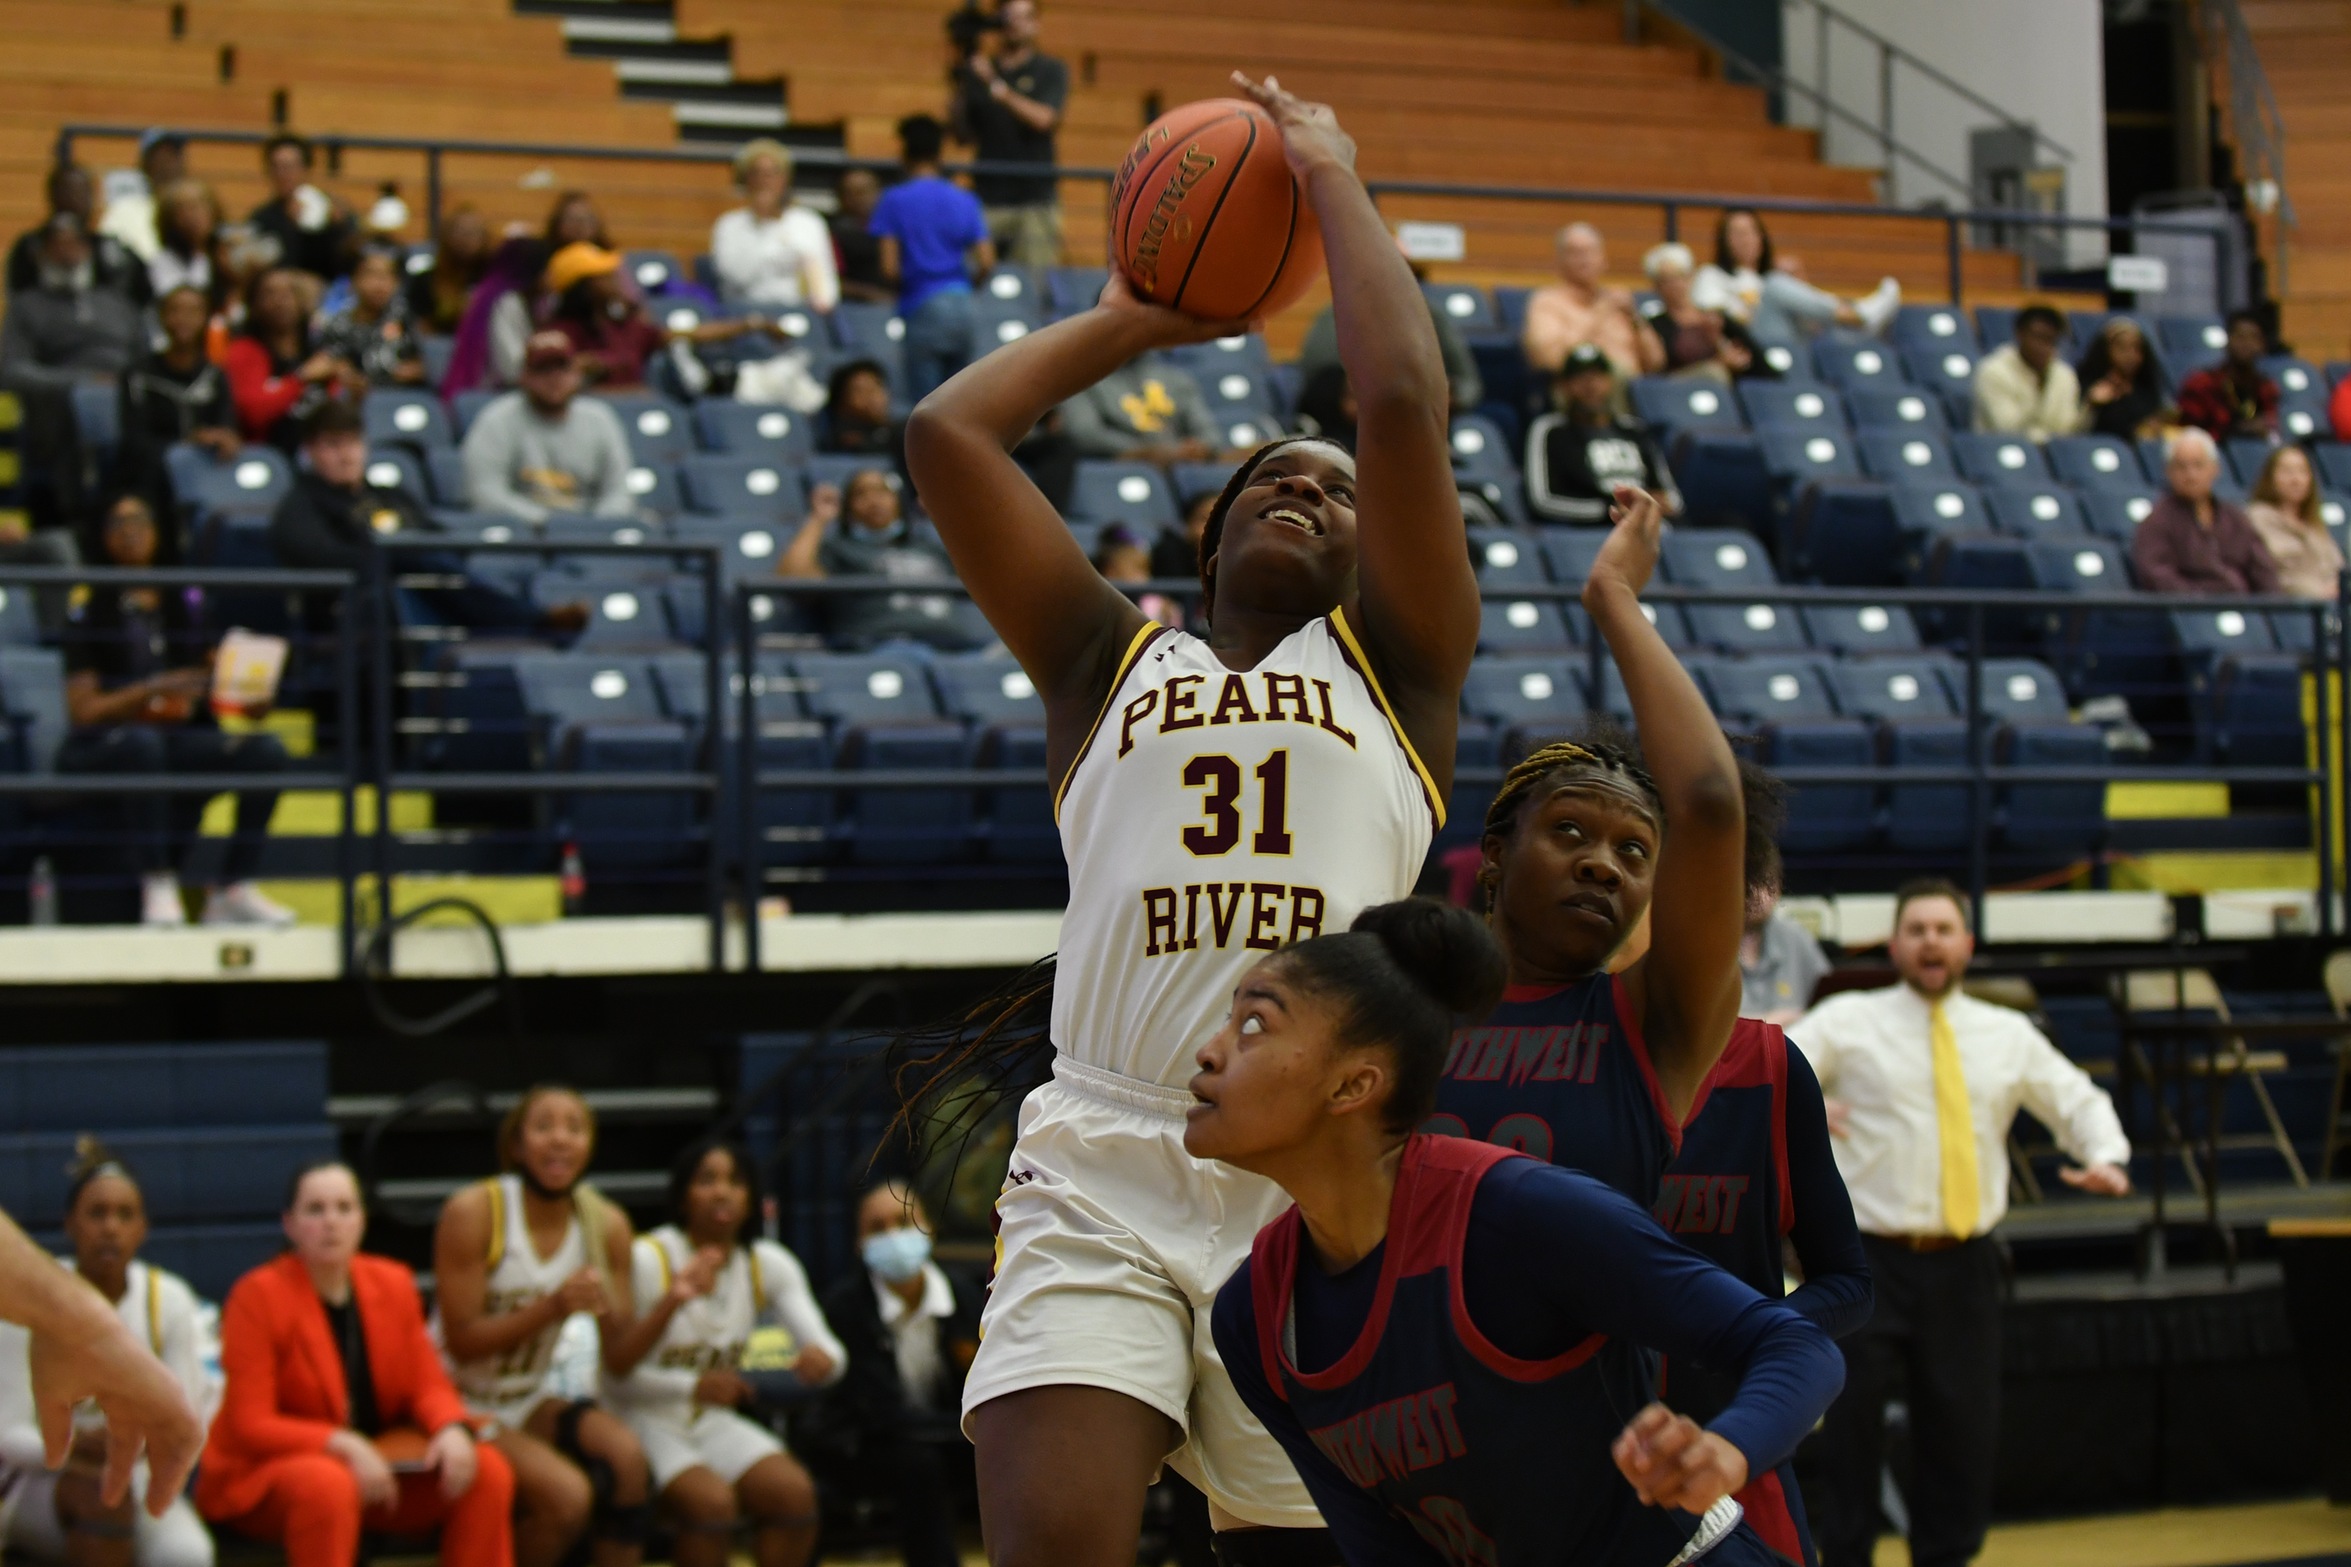 Pearl River secures first Region XXIII title game berth since ‘03 